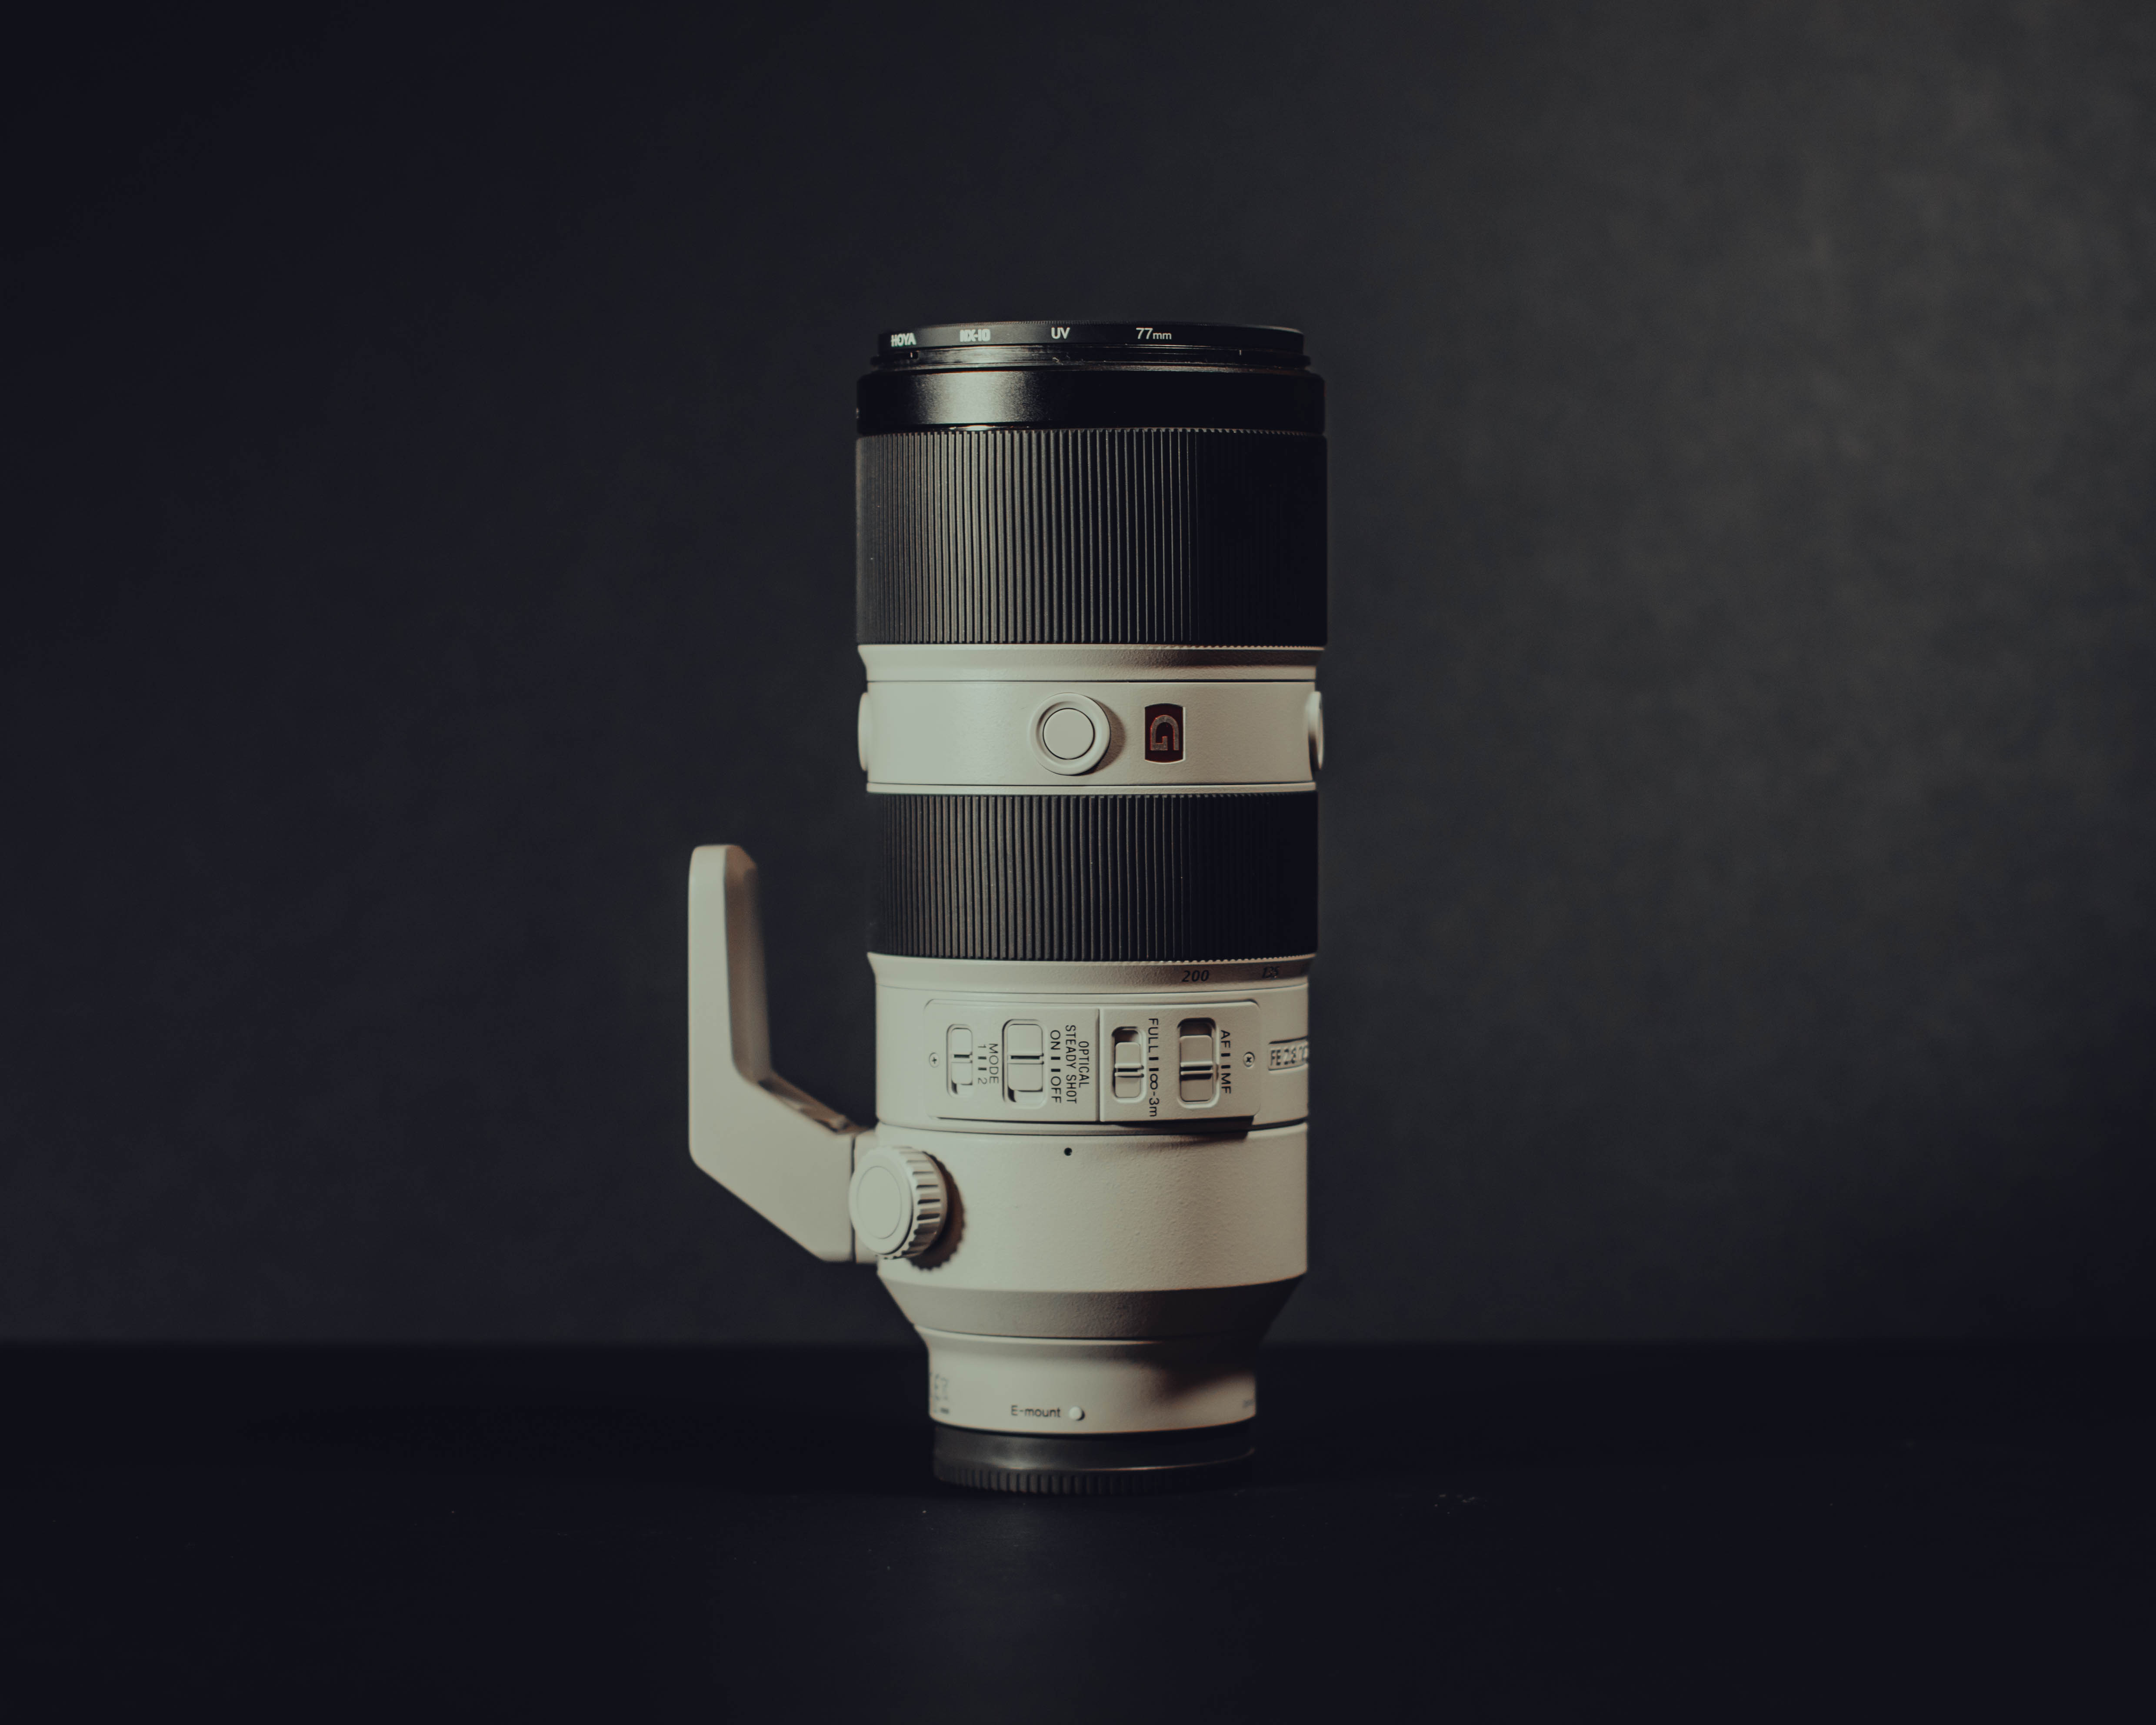 Alternate photo of our Sony 70-200 camera lens. Available on discount in our media hire shop in Cardiff.